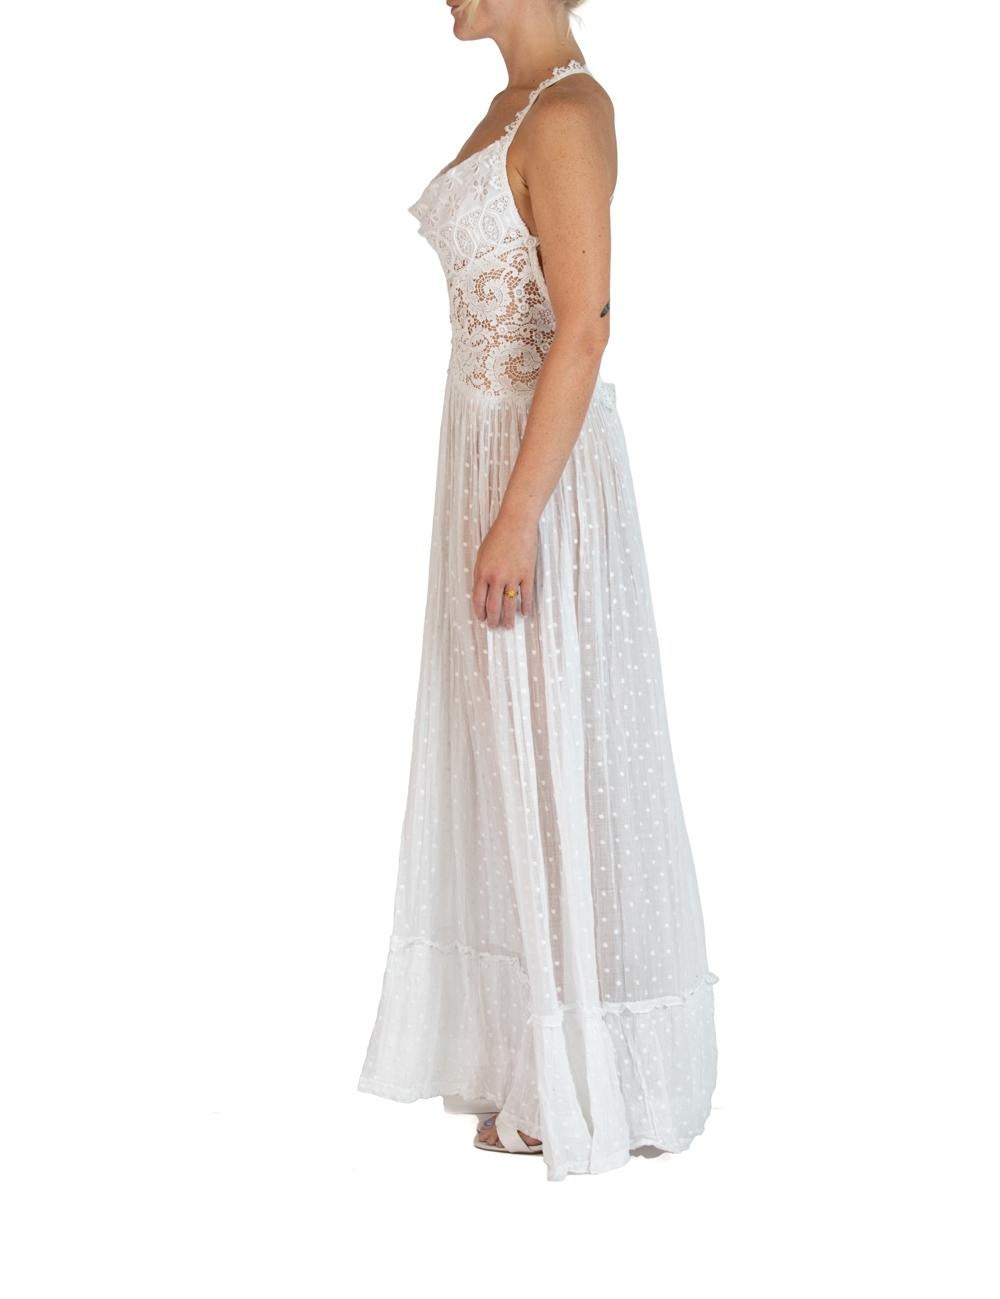 MORPHEW ATELIER White Organic Cotton With Victorian Lace & Dotted Voile Gown In New Condition For Sale In New York, NY